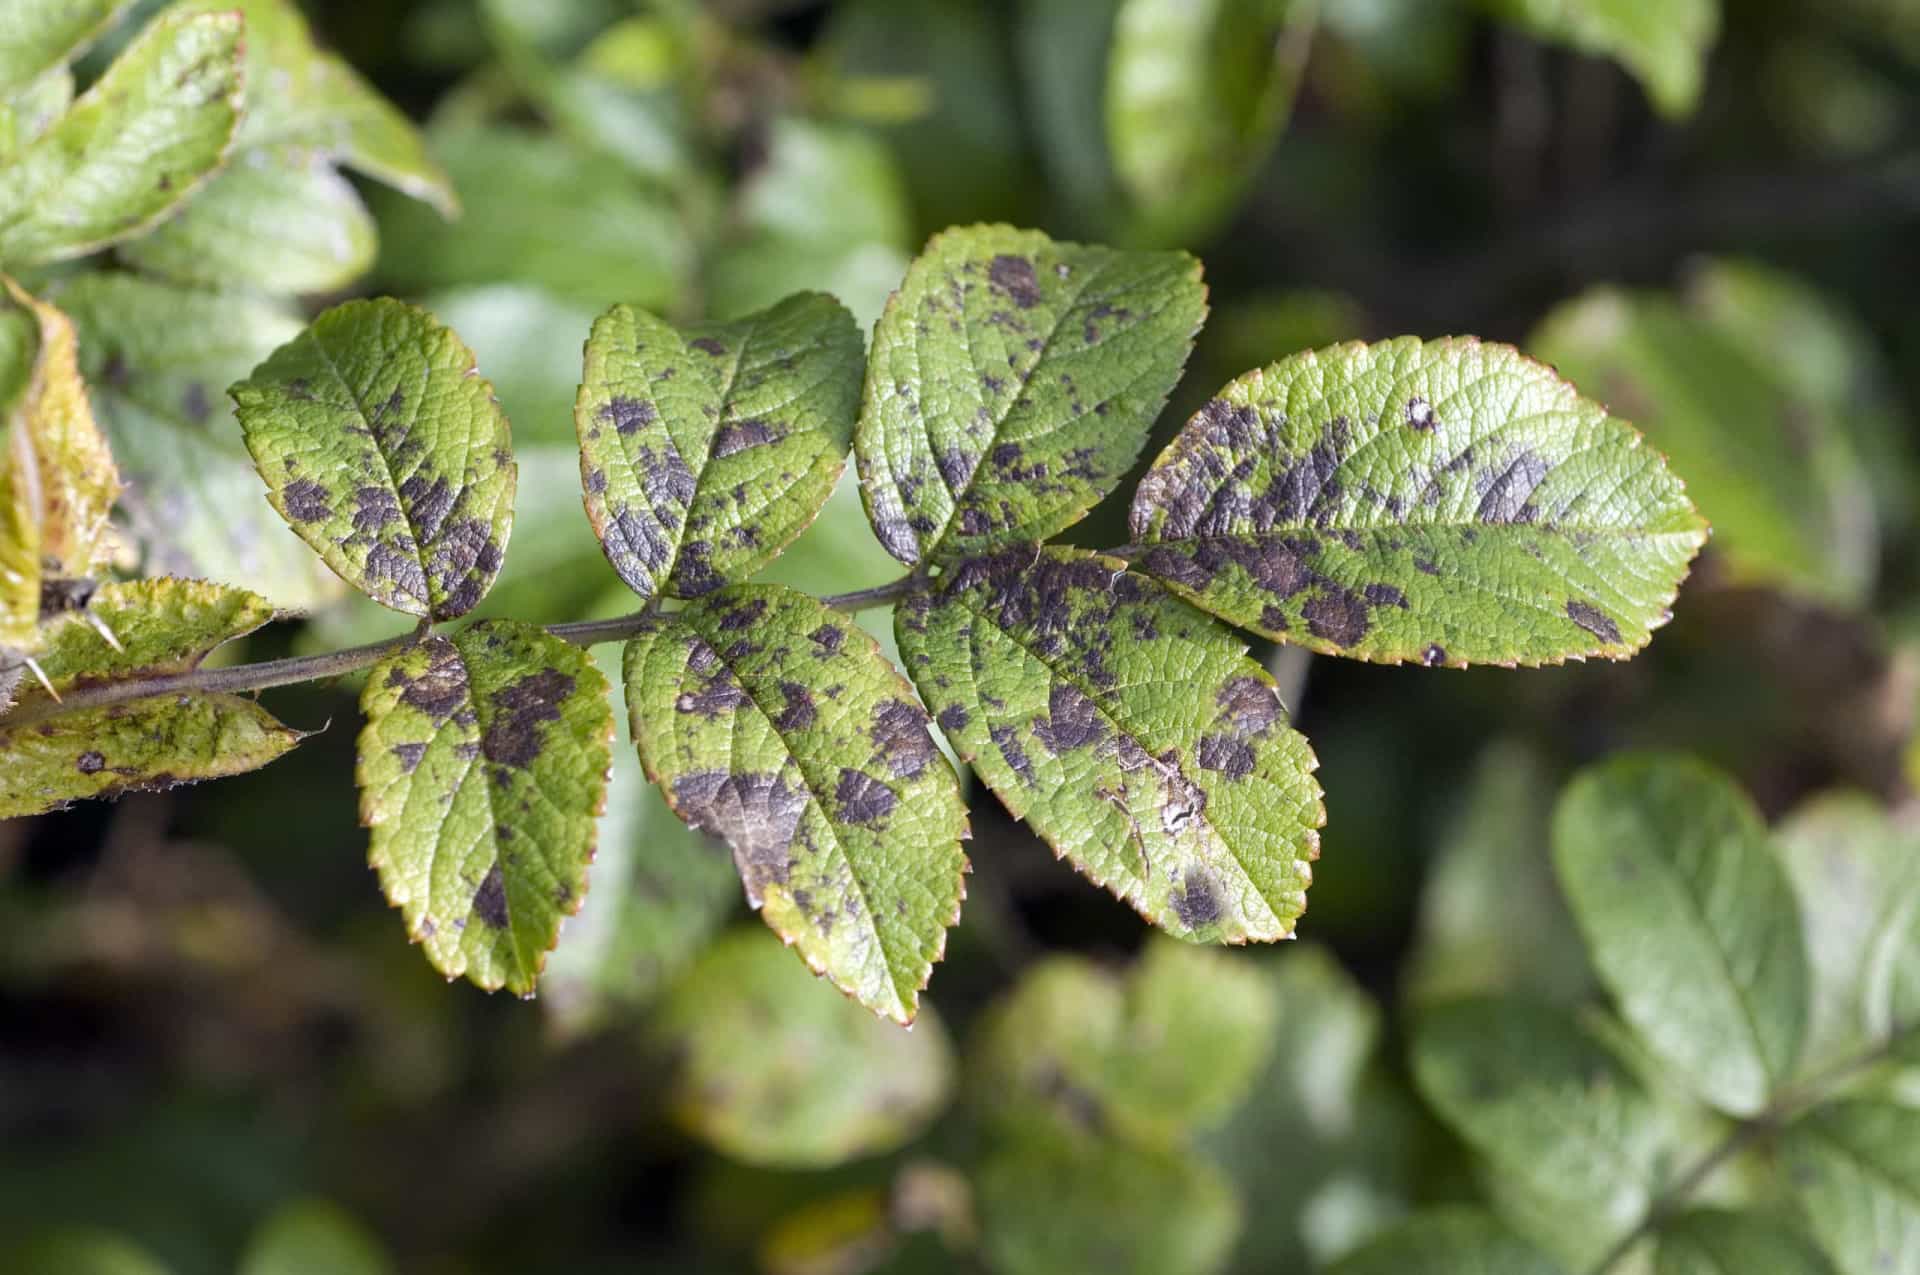 Common plant diseases and how to beat them